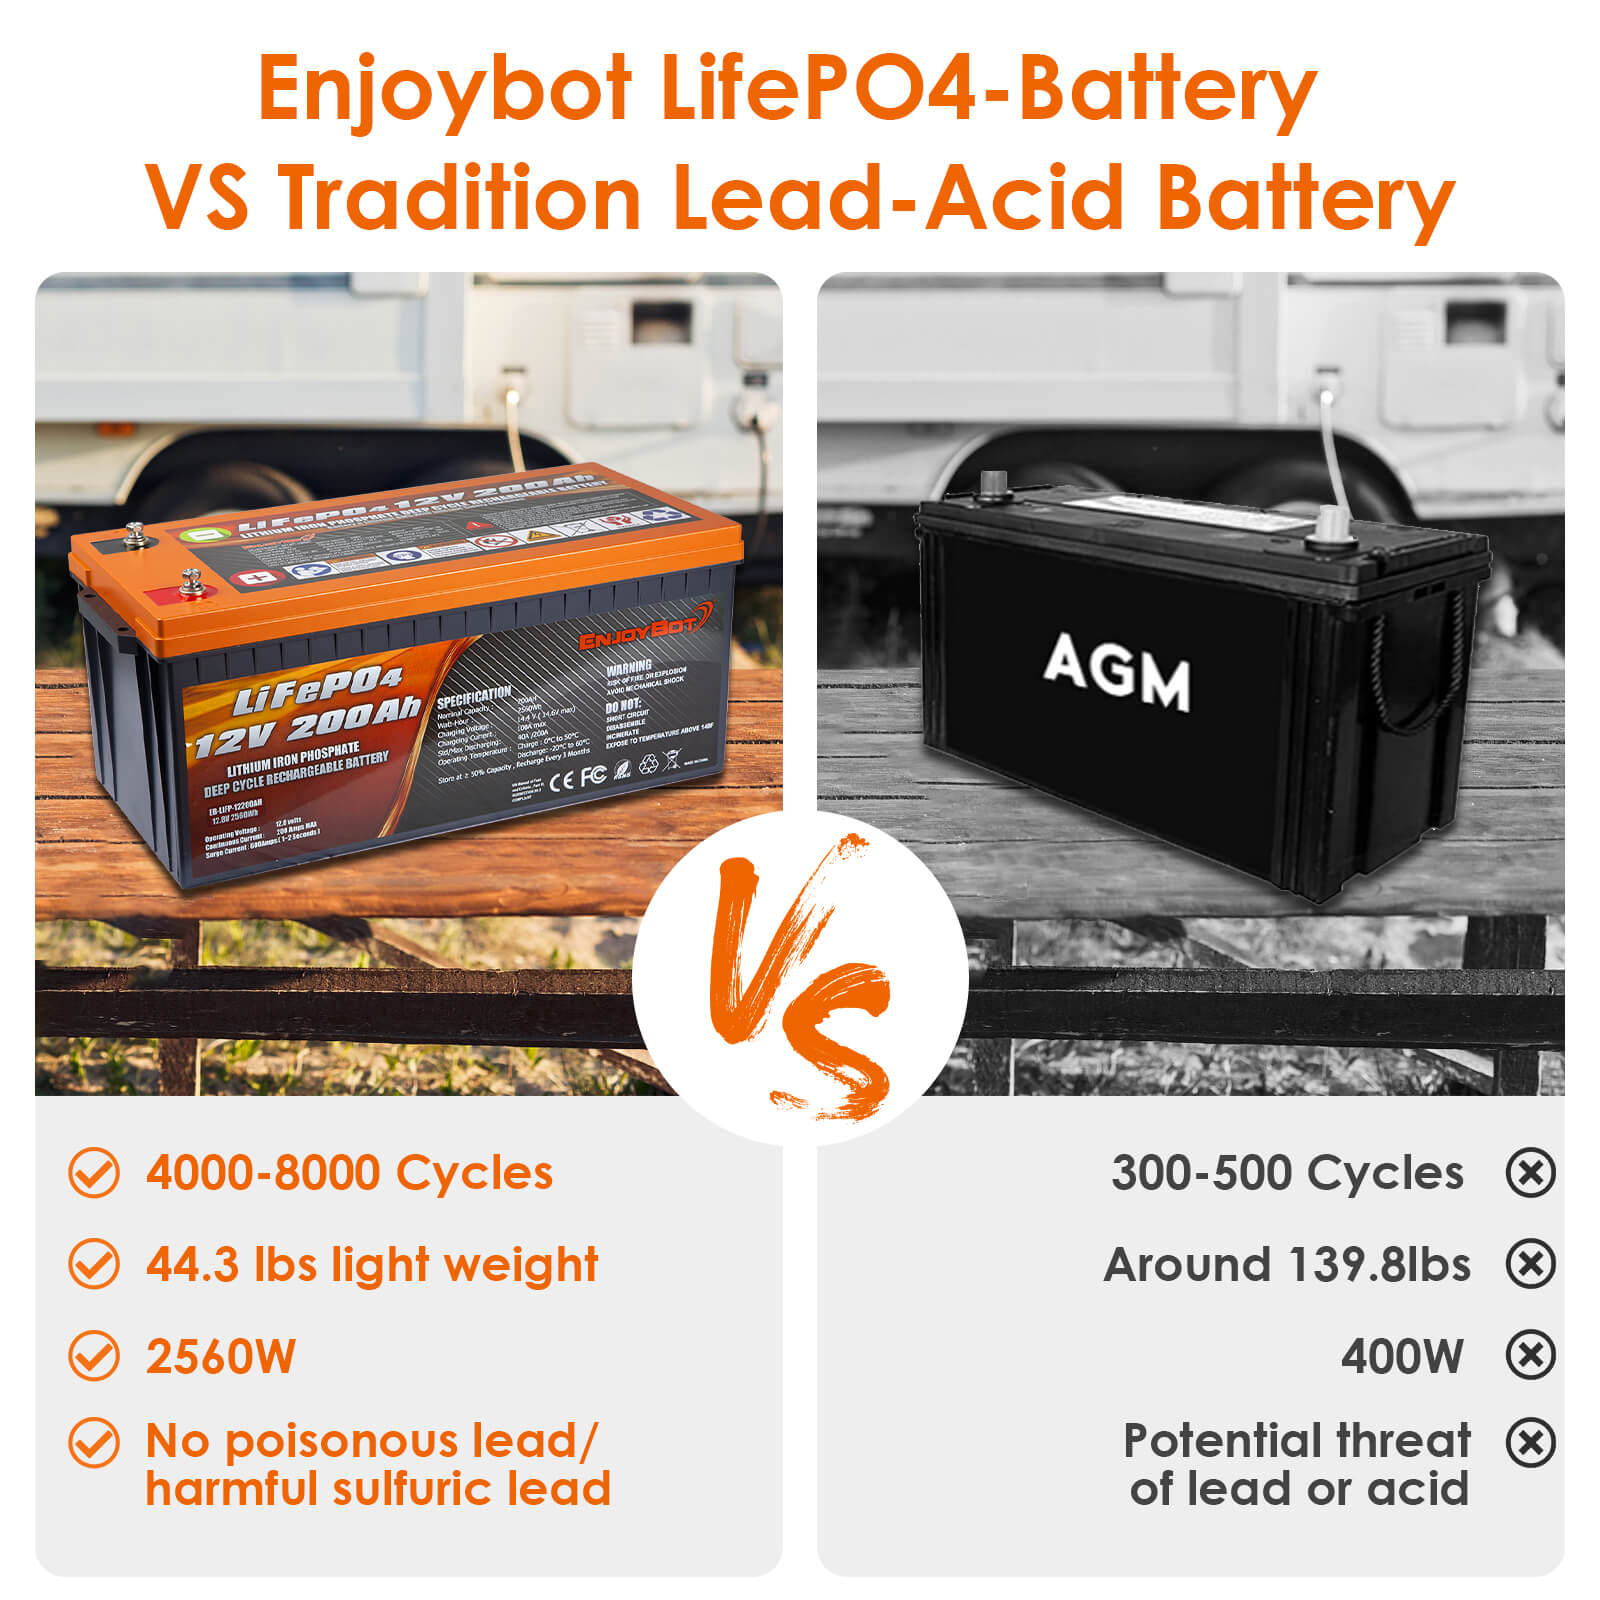 Temgot 12V 200Ah LiFePO4 Lithium Battery, Up to 5000 Cycles, Built-in